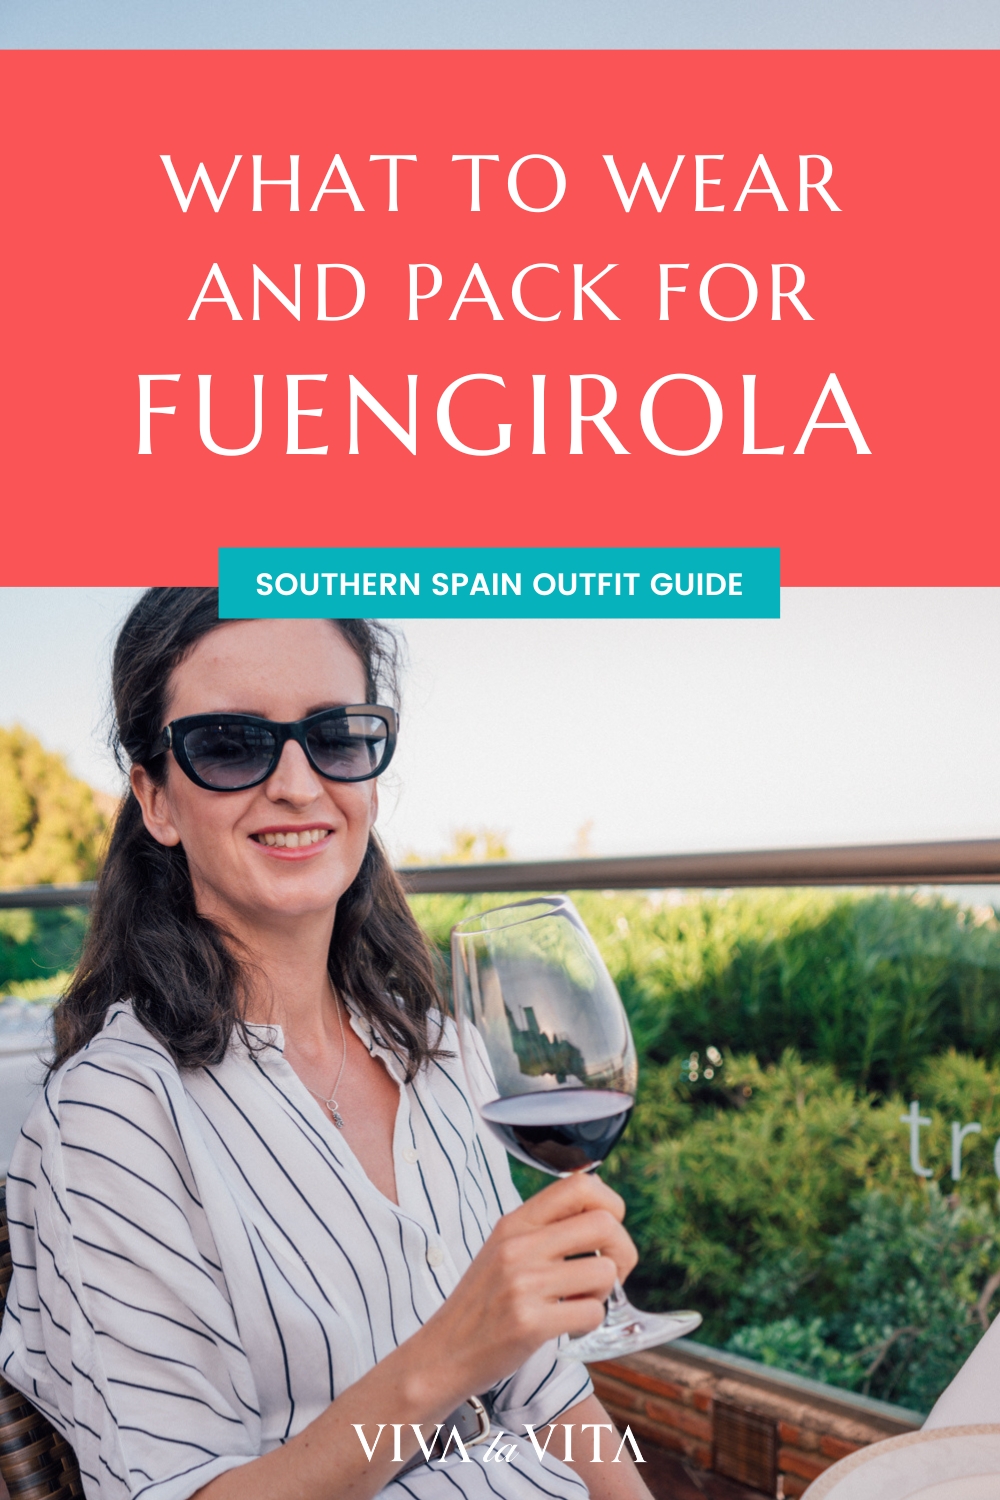 pinterest image showing a woman dining outdoors in Fuengirola, with a headline - what to wear and pack for Fuengirola, southern spain outfit guide